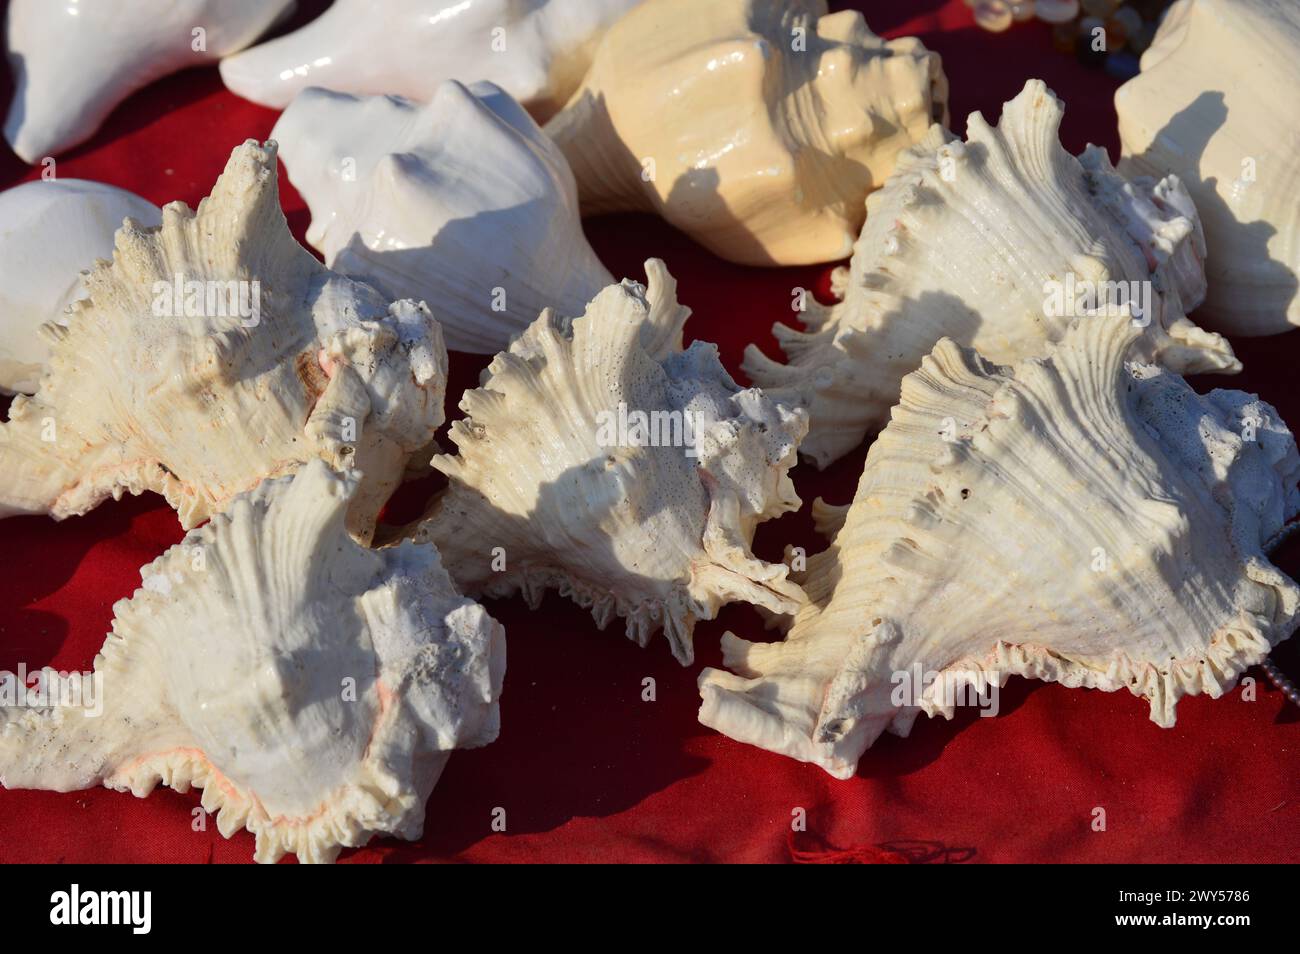 Blowing conch shell,sankh also called seashell horn or shell trumpet made from a conch, the shell of several  kinds of sea snails. Stock Photo